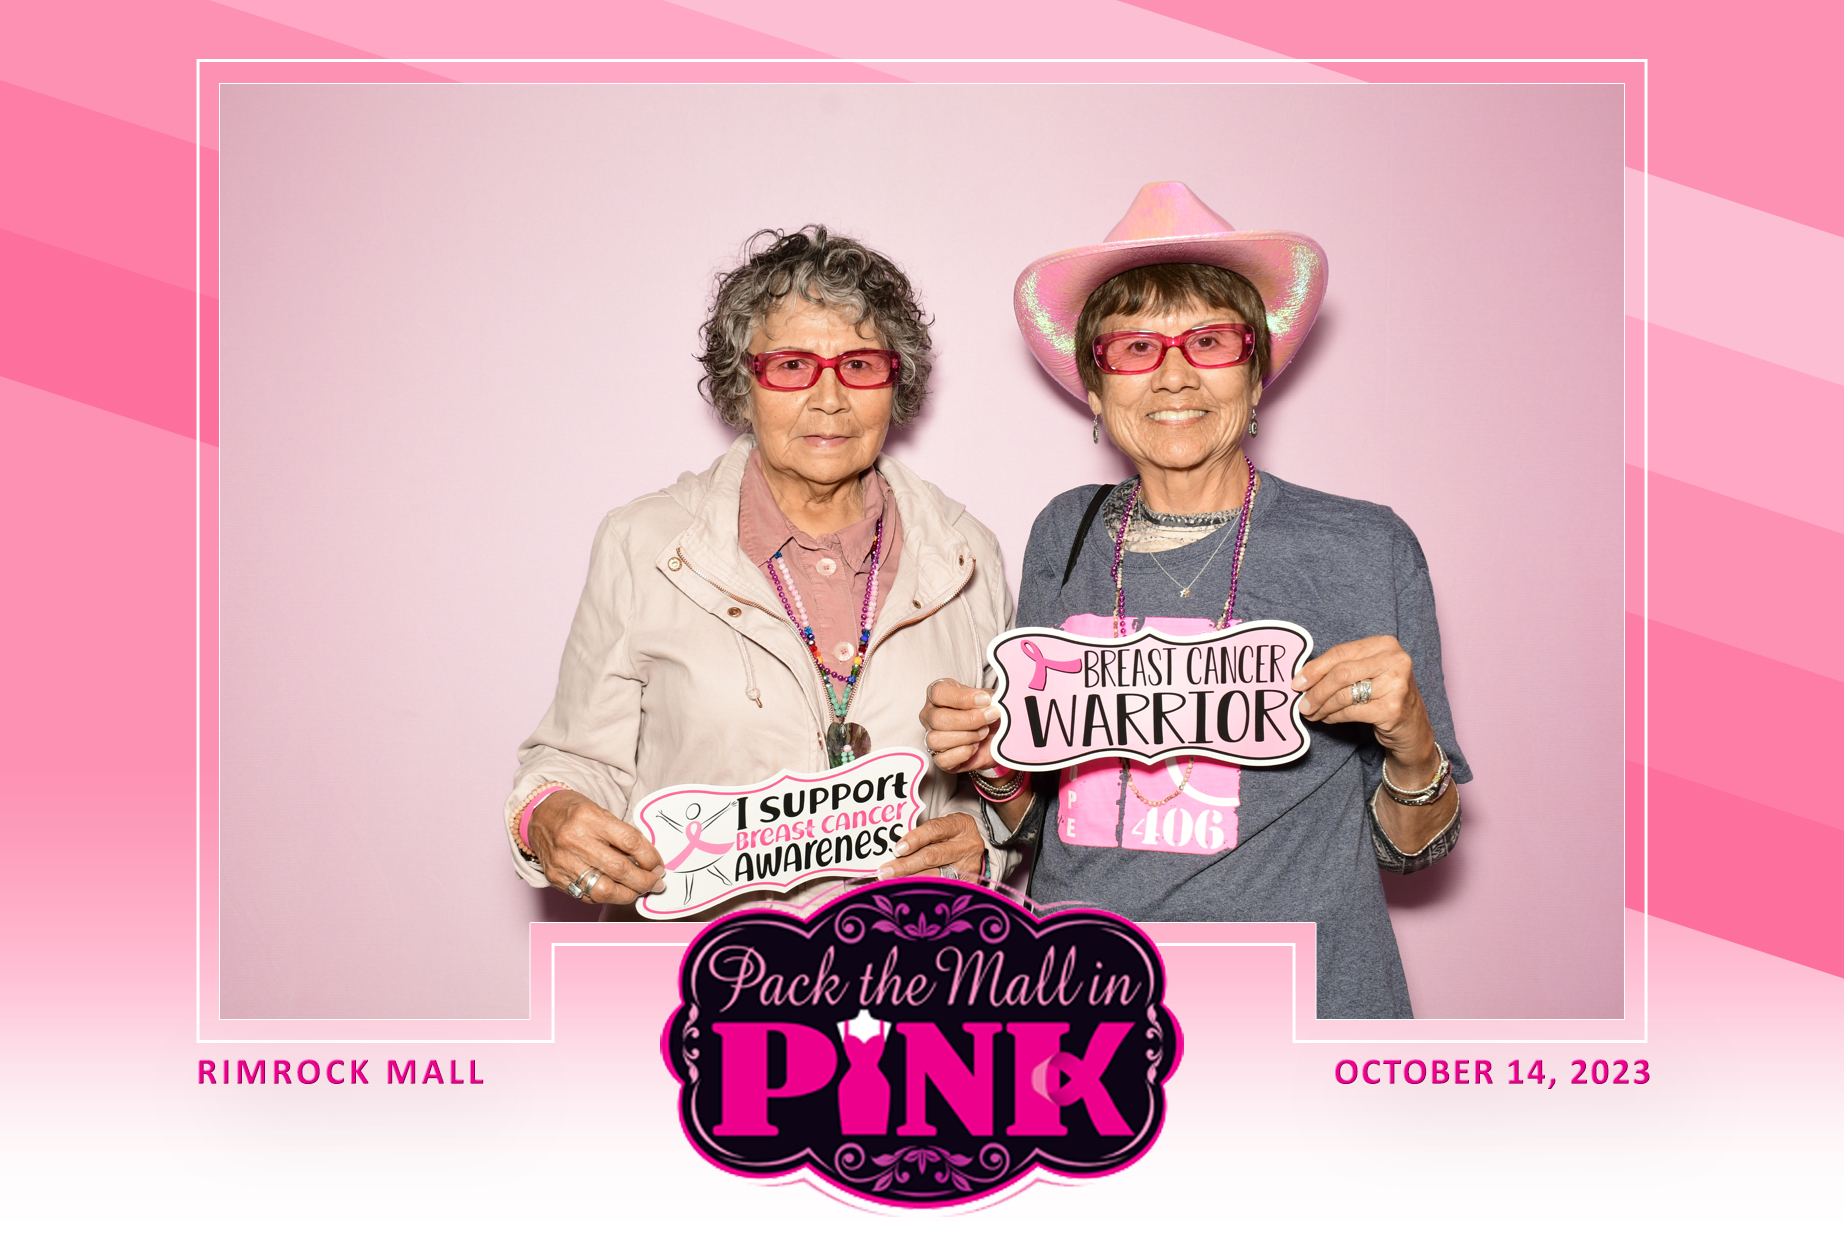 Sample photo from Pack the Mall in Pink fundraiser